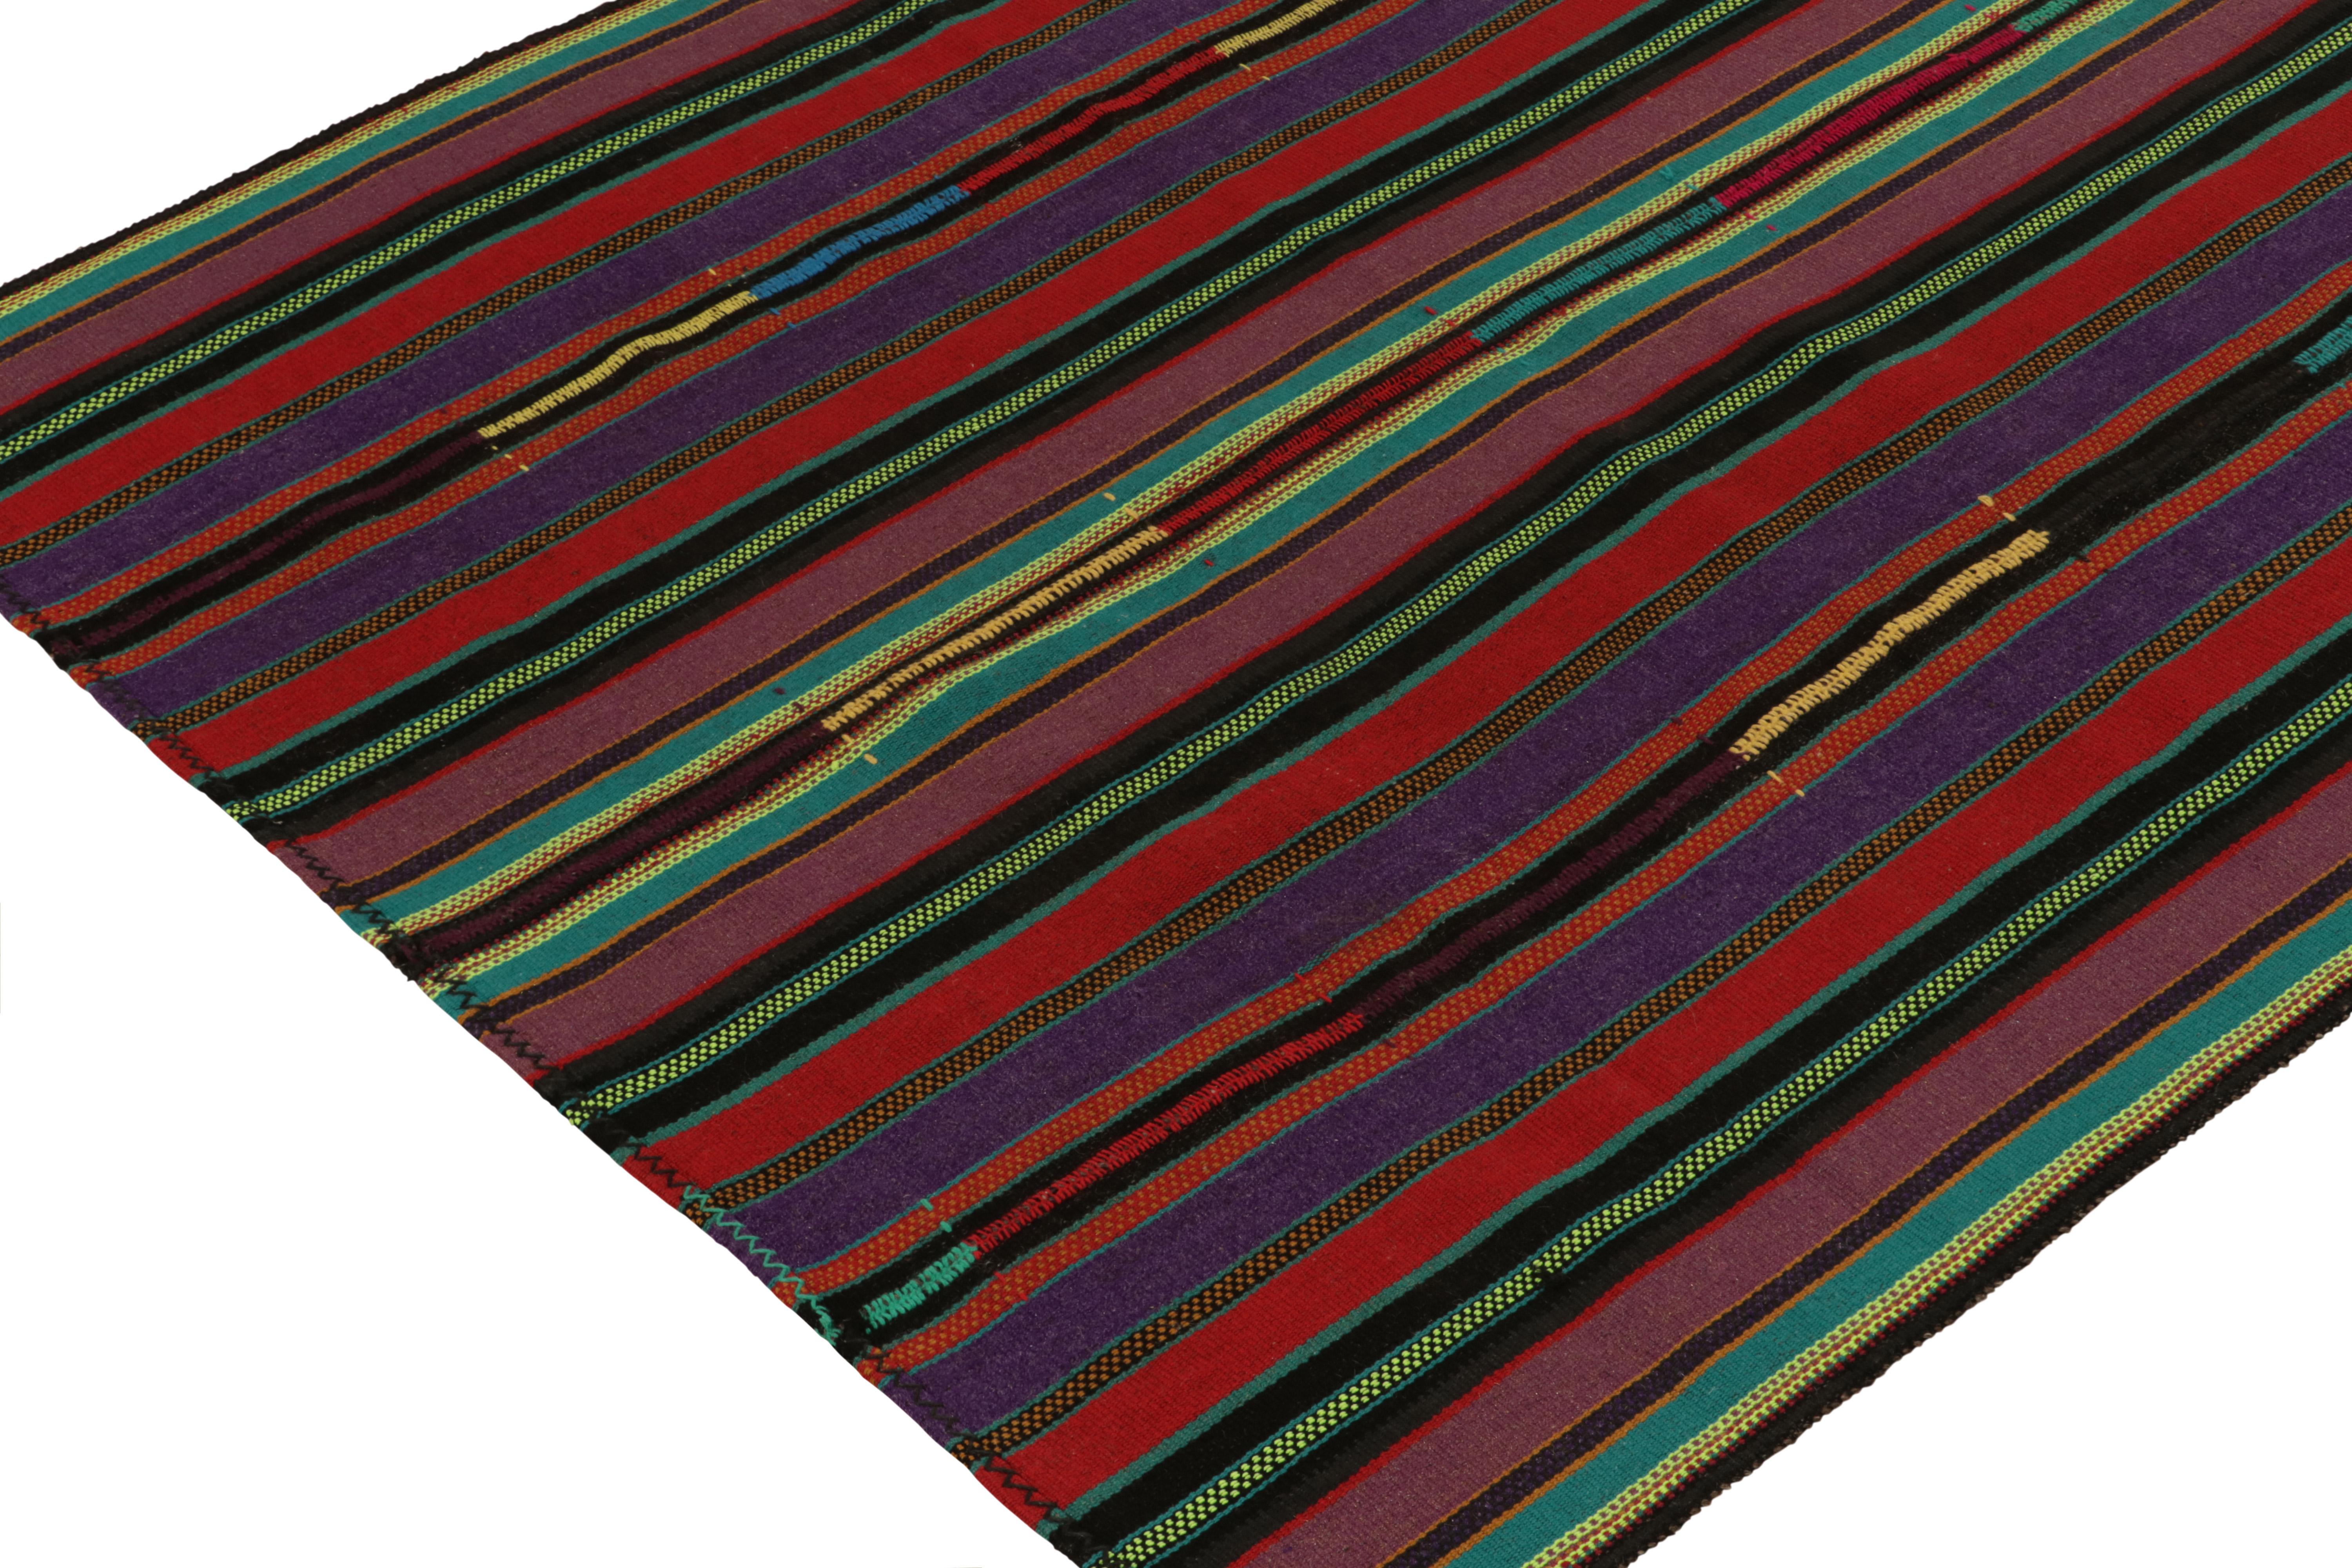 Turkish 1950s Vintage Kilim Style in Red, Purple, Green Stripe Patterns by Rug & Kilim For Sale